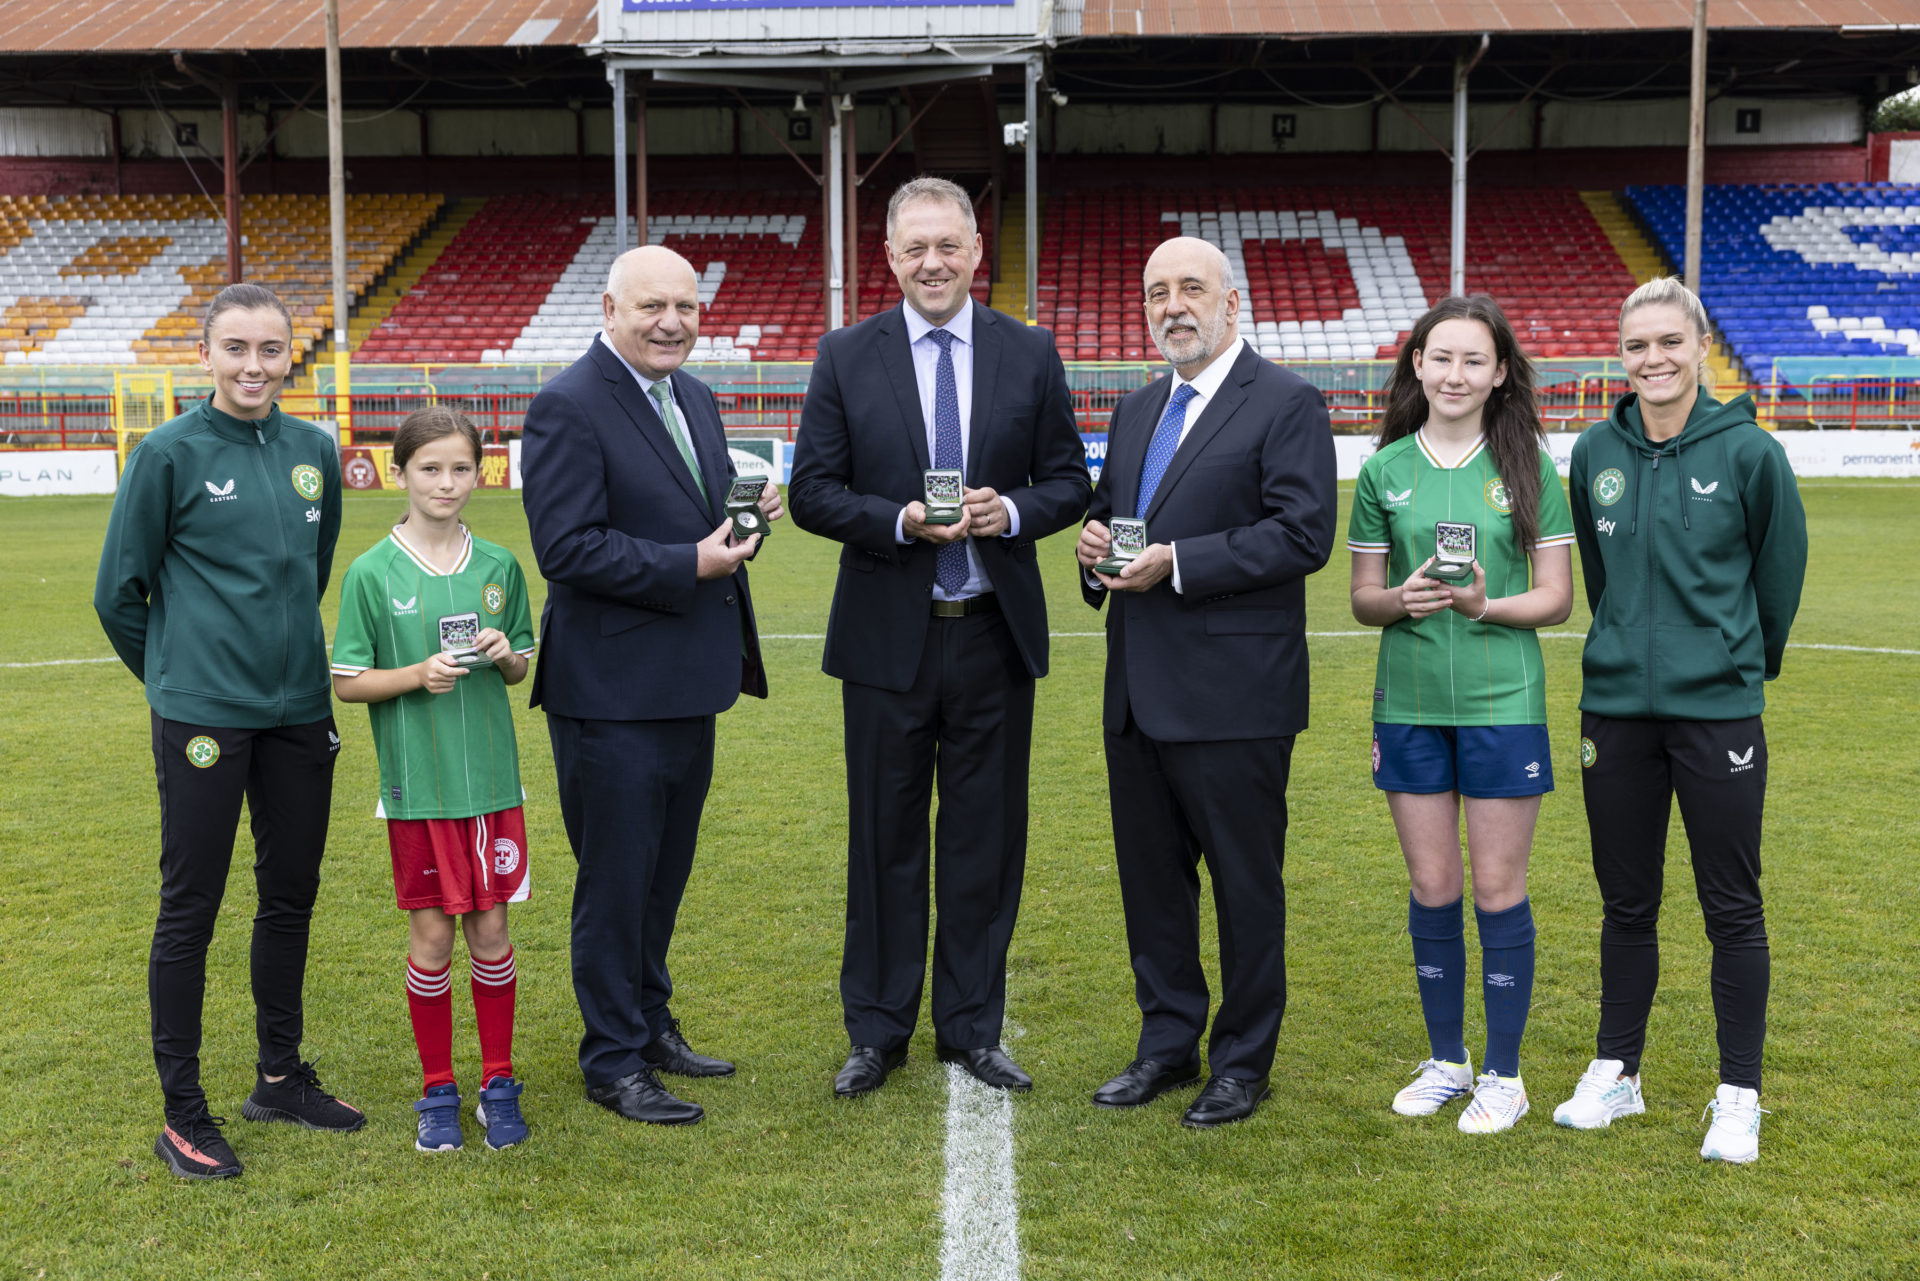 Ireland international player Abbie Larkin, Shelbourne youth player Daisy White, FAI President Gerry McAnaney, Minister for Sport and Physical Education, Thomas Byrne, Central Bank of Ireland Governor Gabriel Makhlouf, Shelbourne youth player Ellie O’Mahony, and Ireland international Jamie Finn launching the coin in Tolka Park